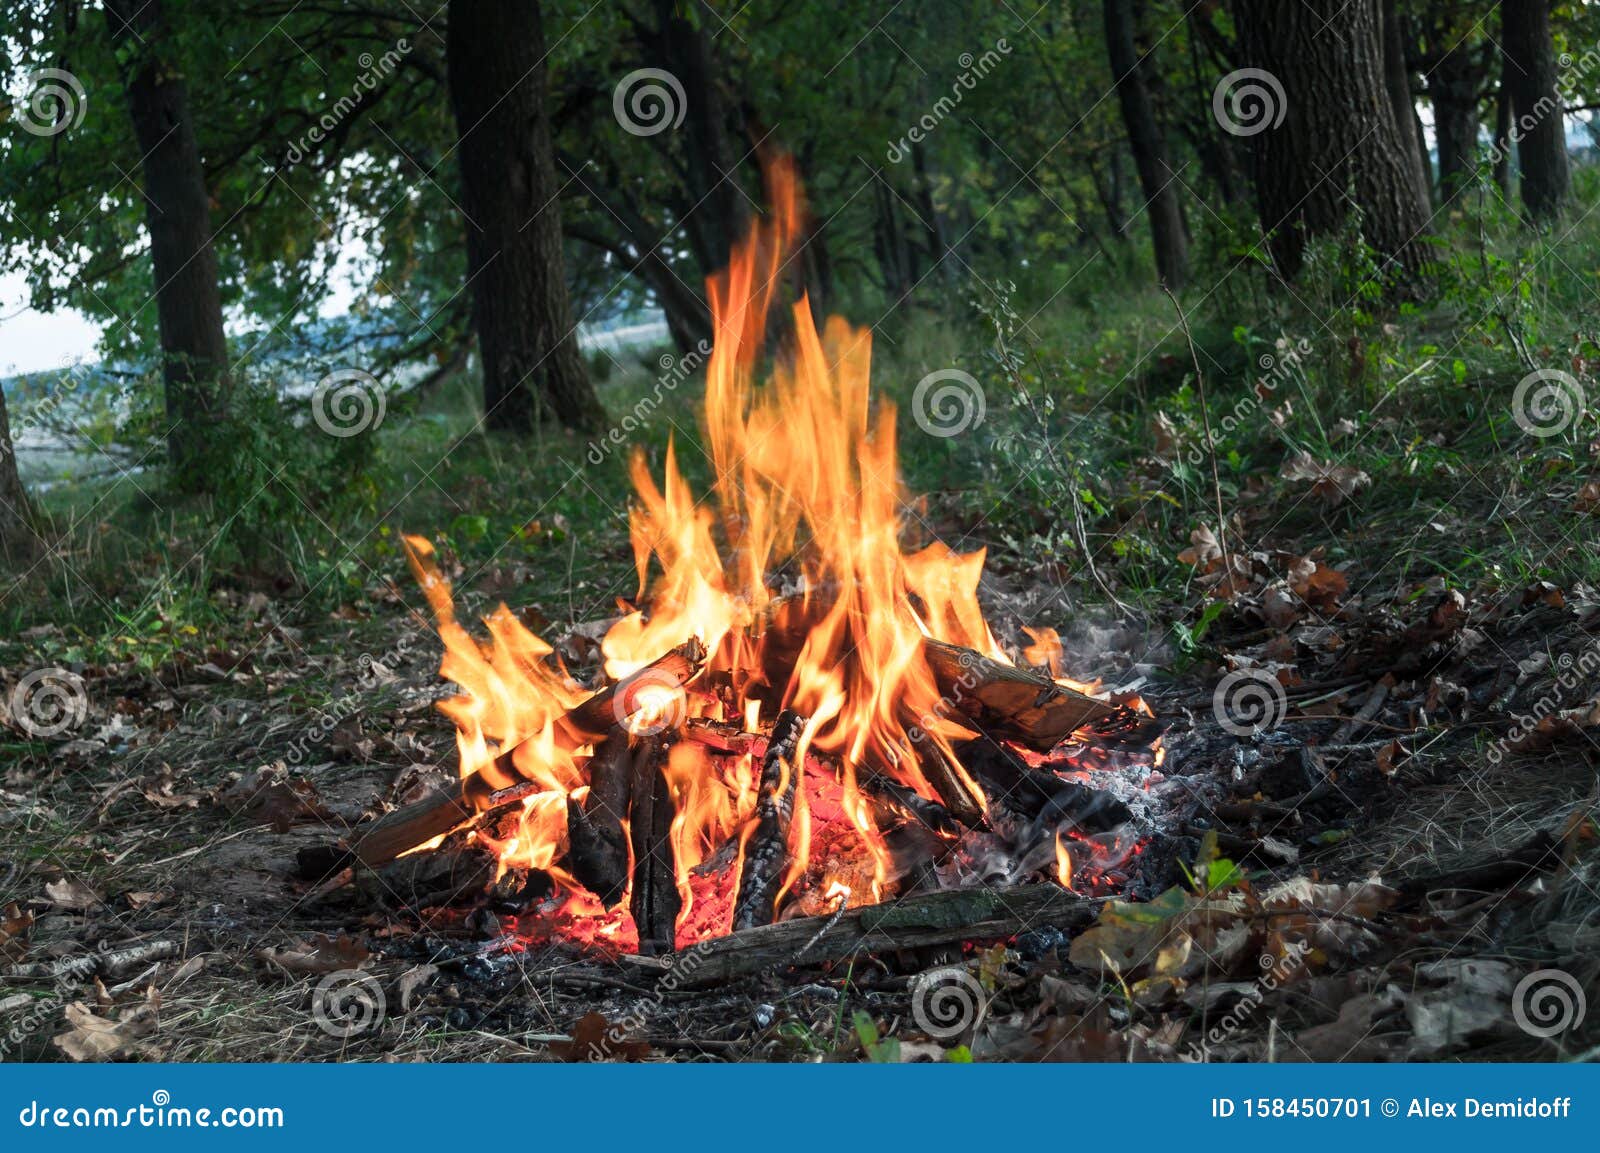 campfire in nature. power of fire. flames devour wood. power of fire. fire.